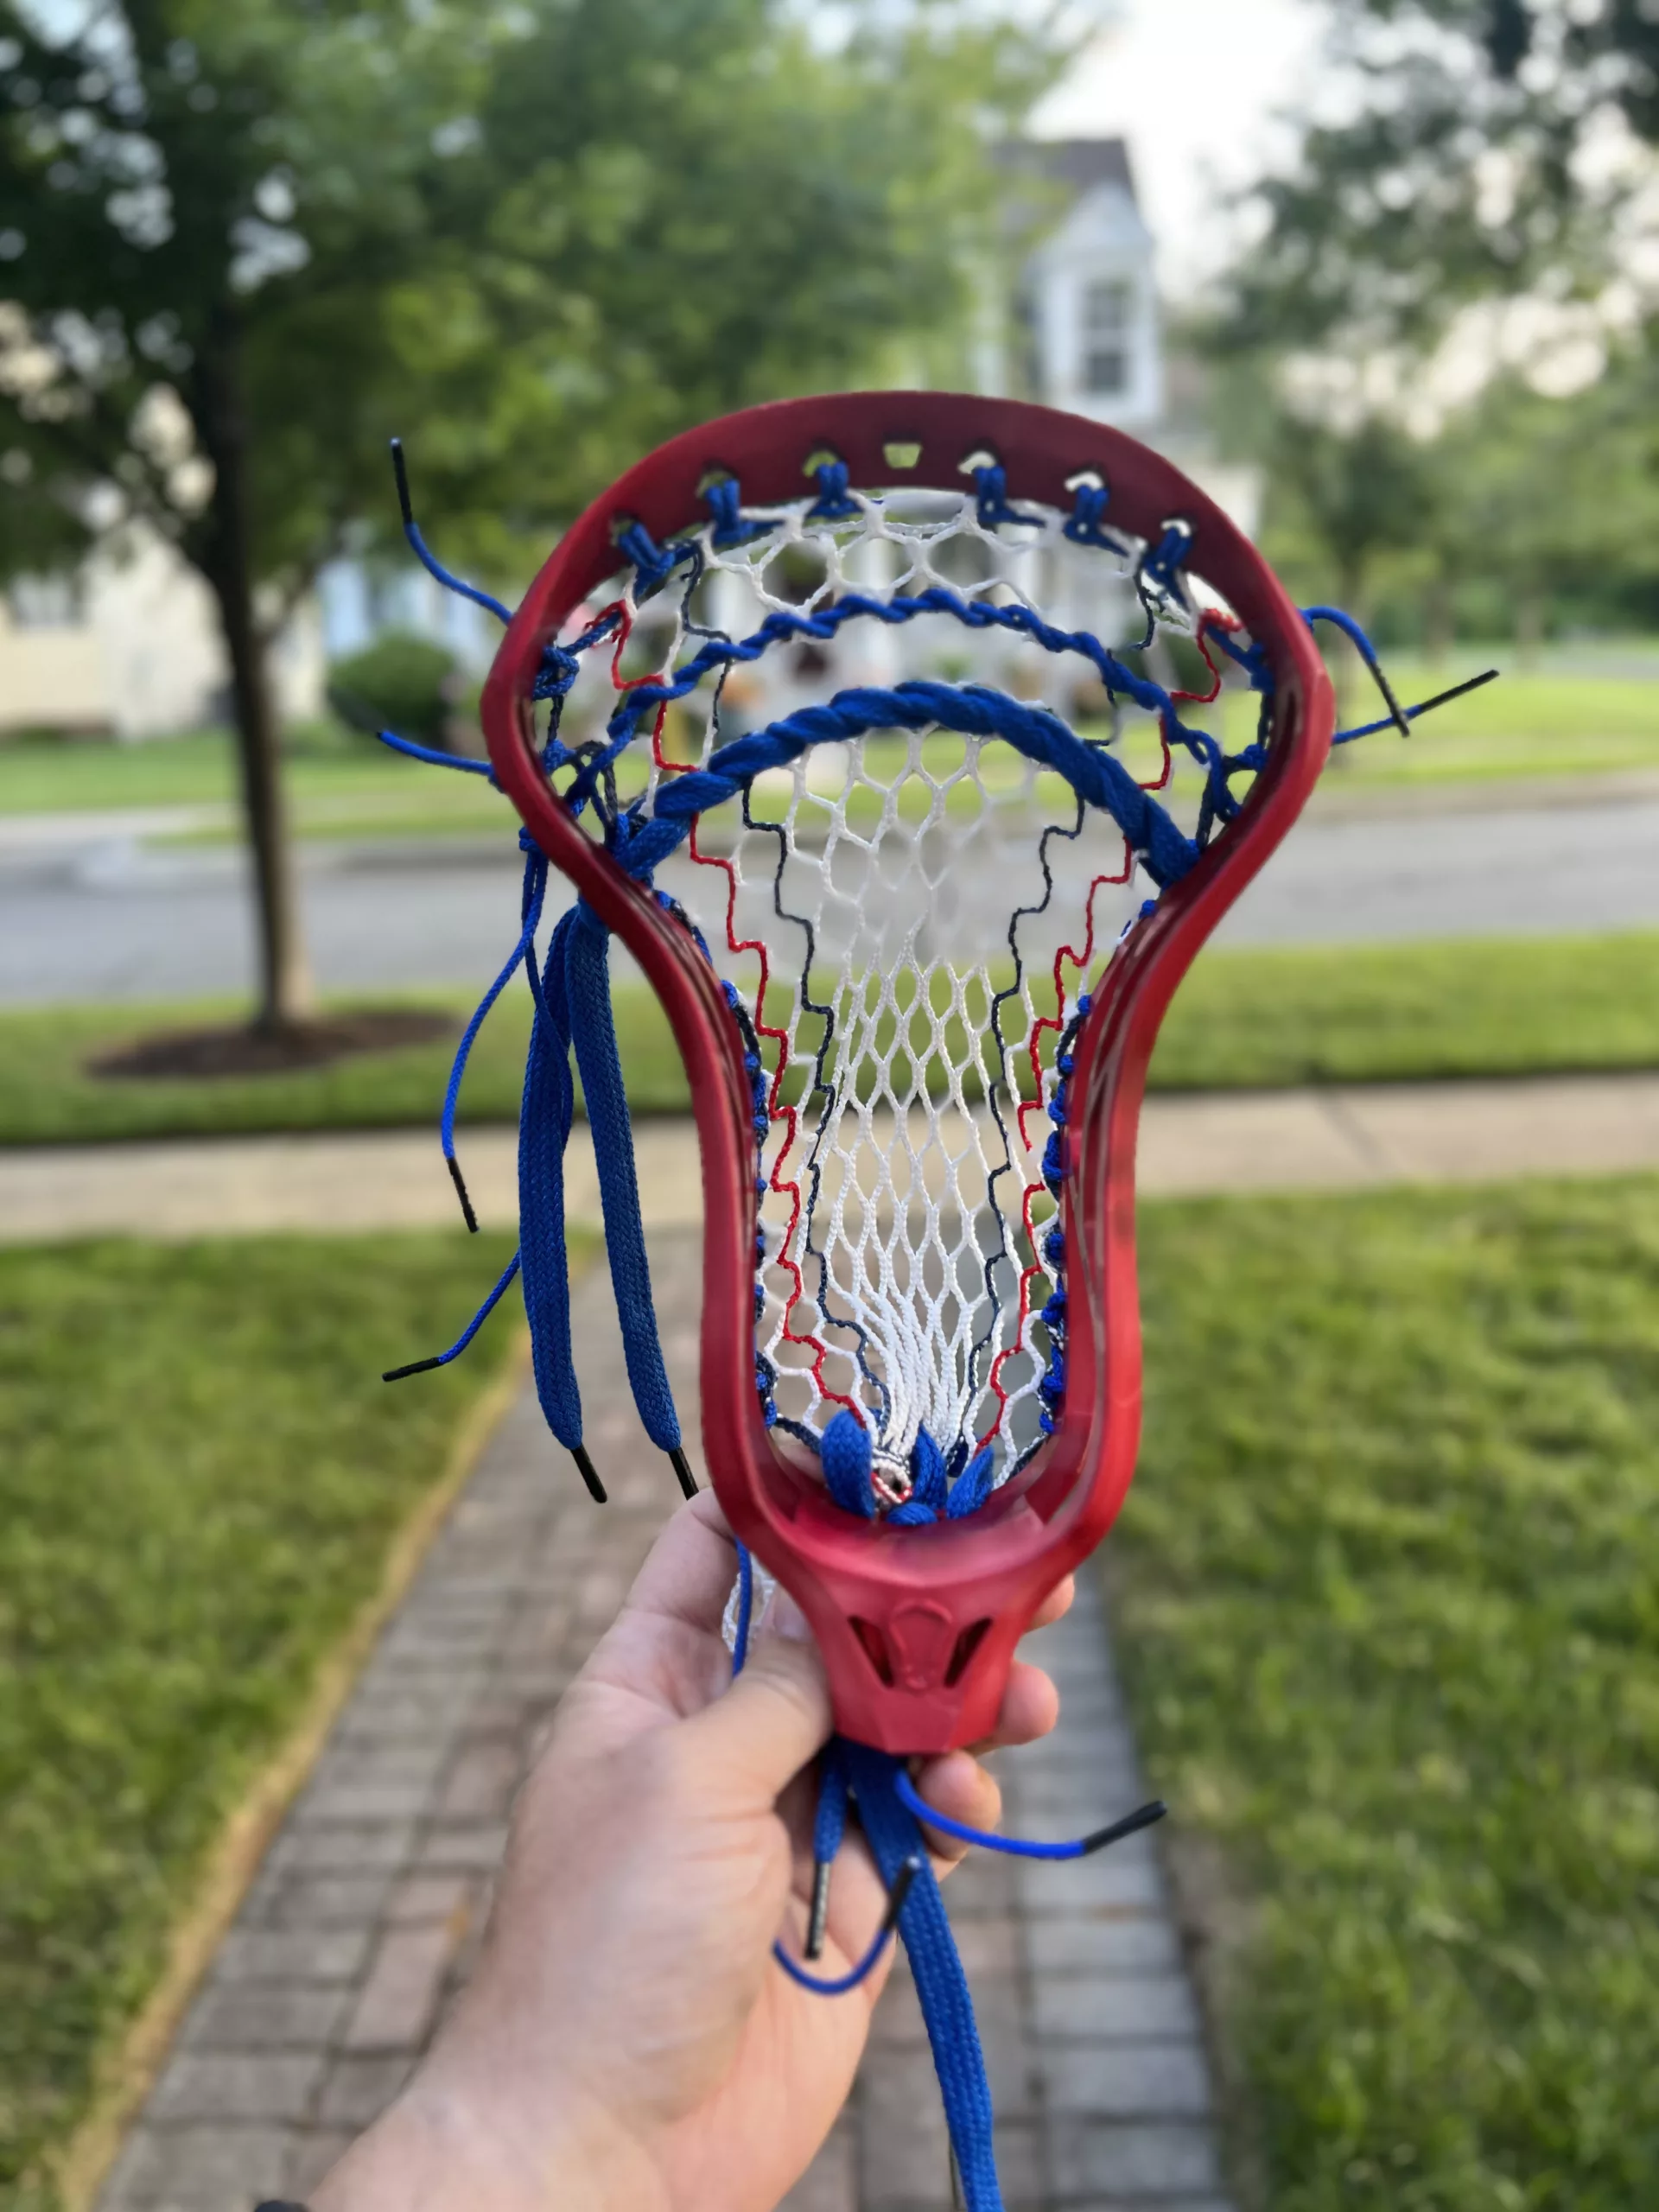 Re-Lax head ECD Mesh and Strings with custom Powell Lacrosse strung head